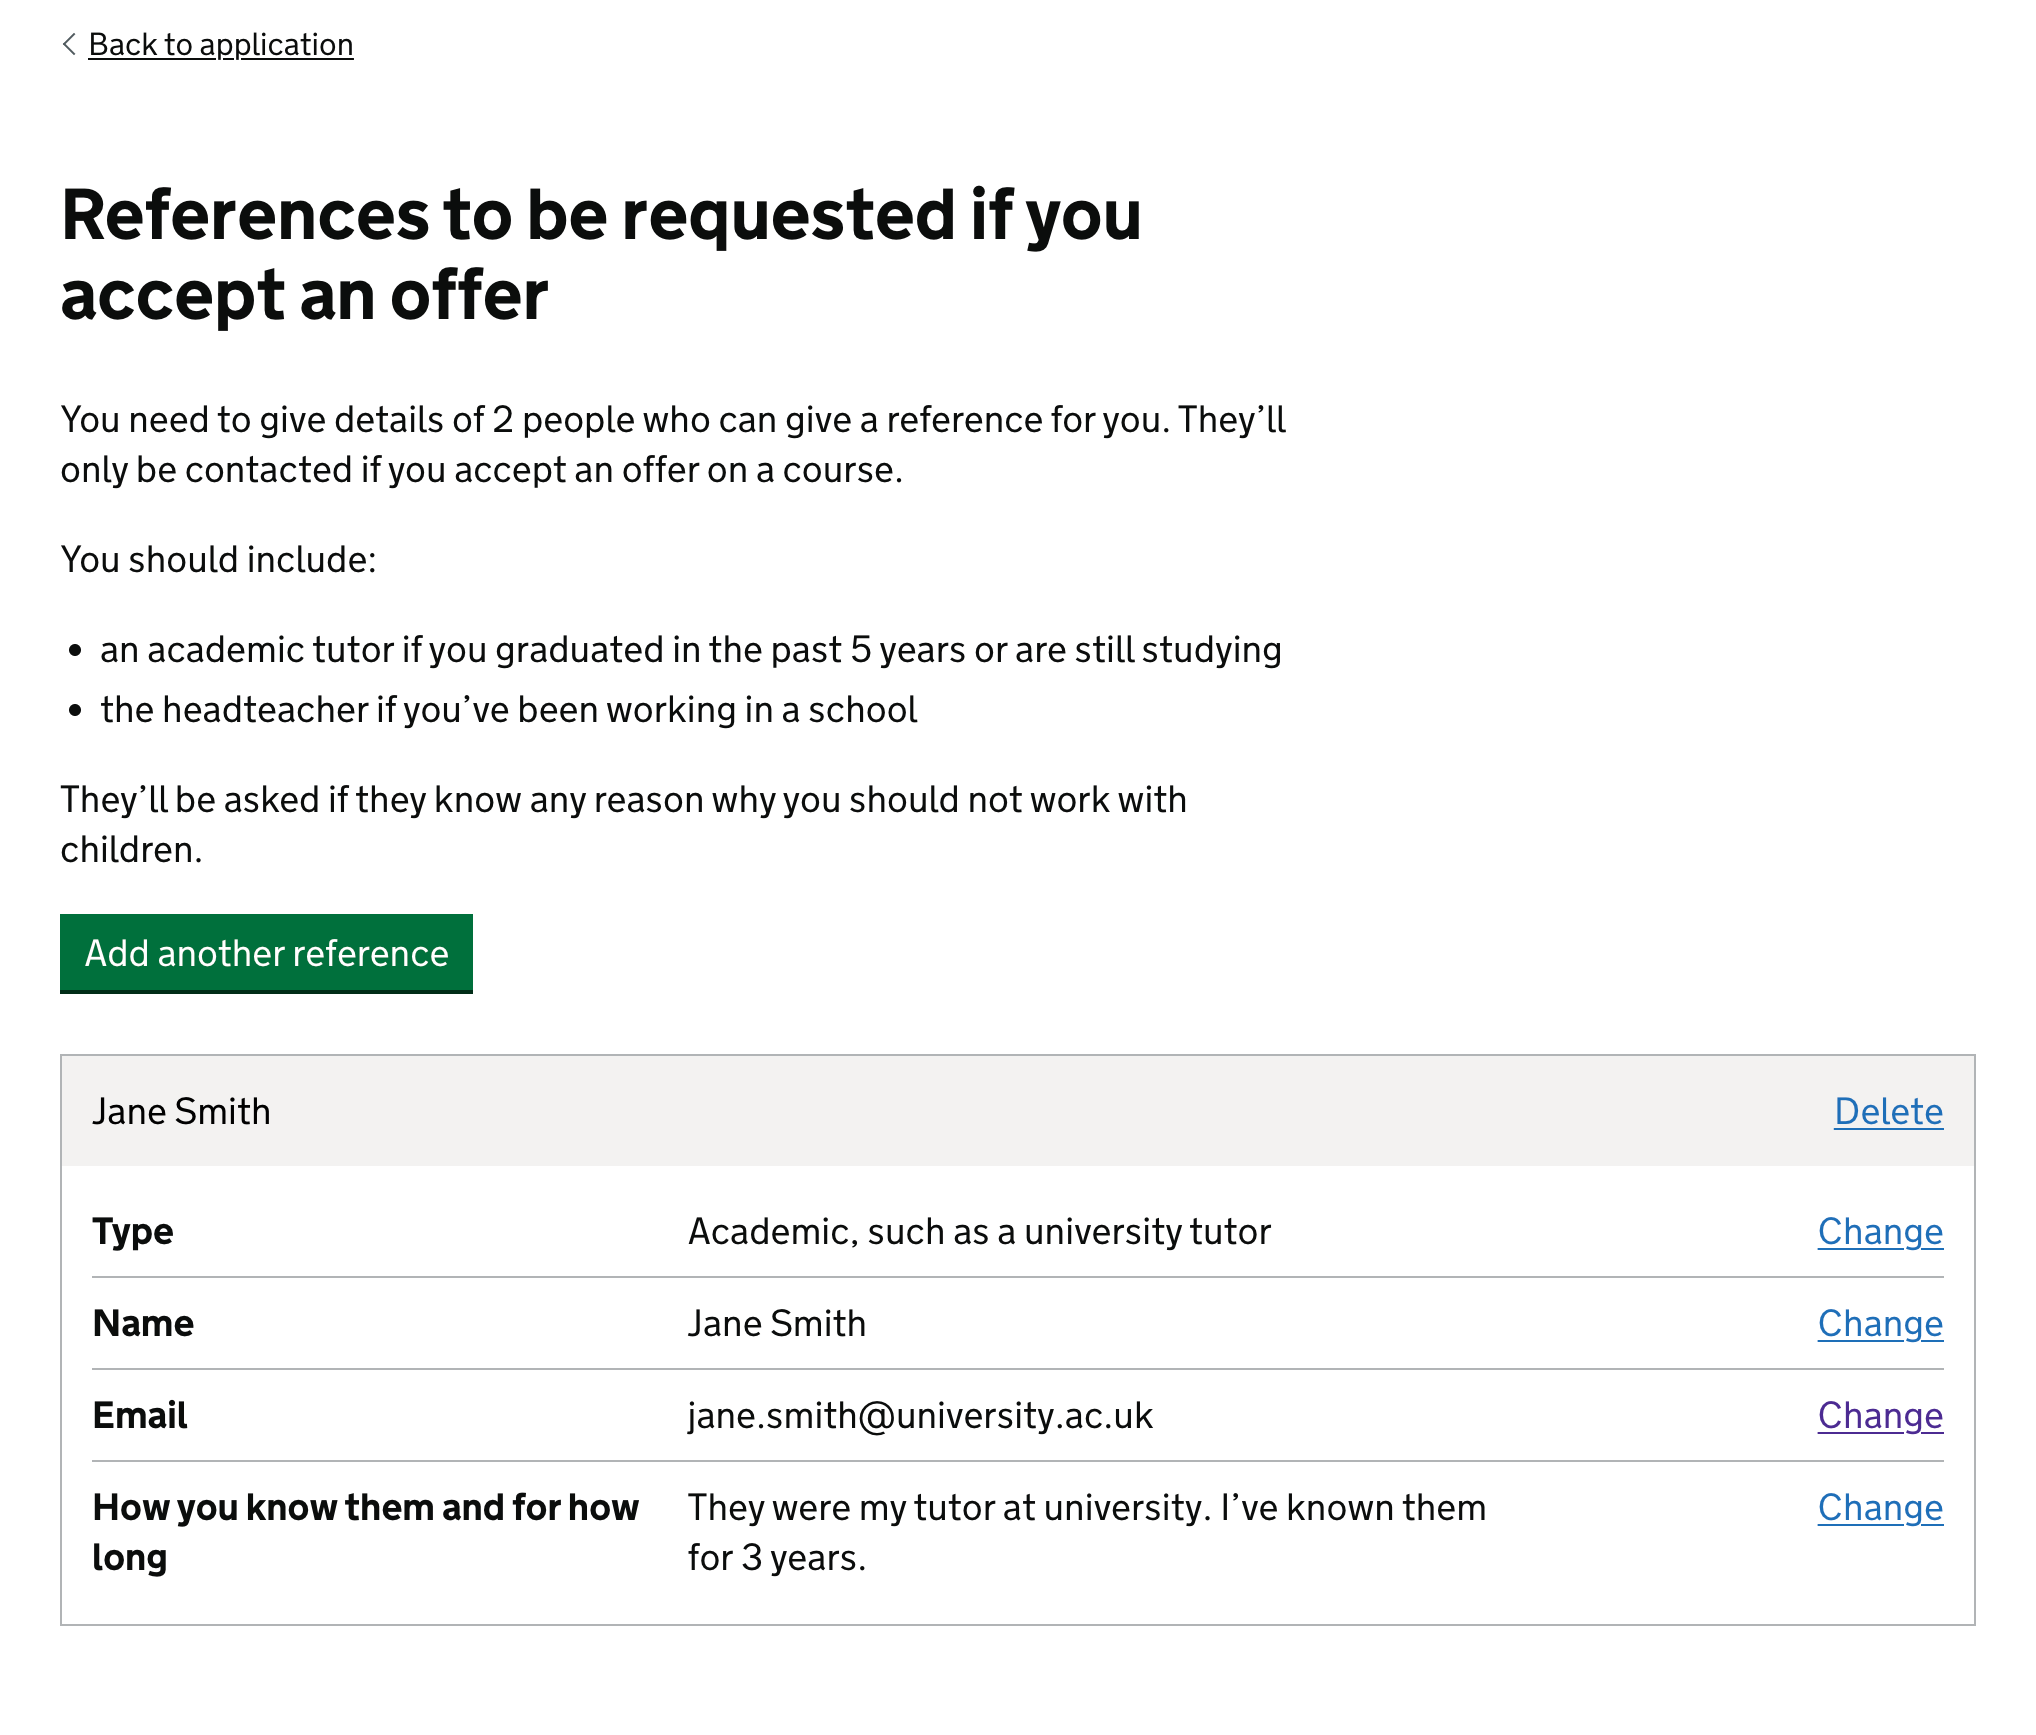 Screenshot showing page with the heading 'References to be requested if you accept an offer'. It contains the same content as the introduction page, and then displays a green button labelled 'Add another reference' and then summarises the details of 1 reference given